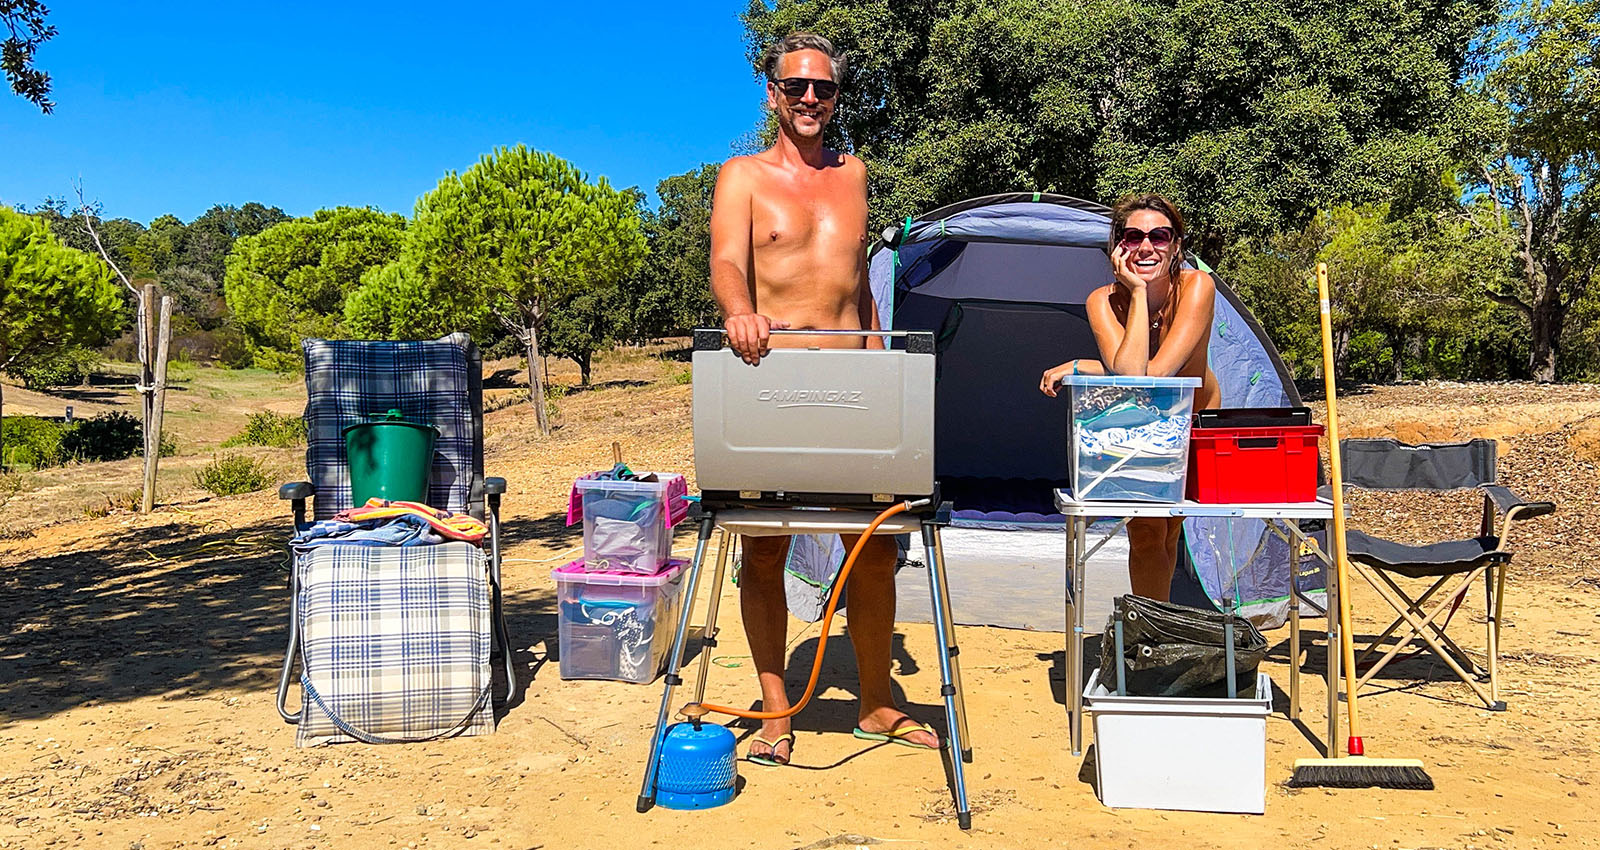 How to find a great naturist campsite